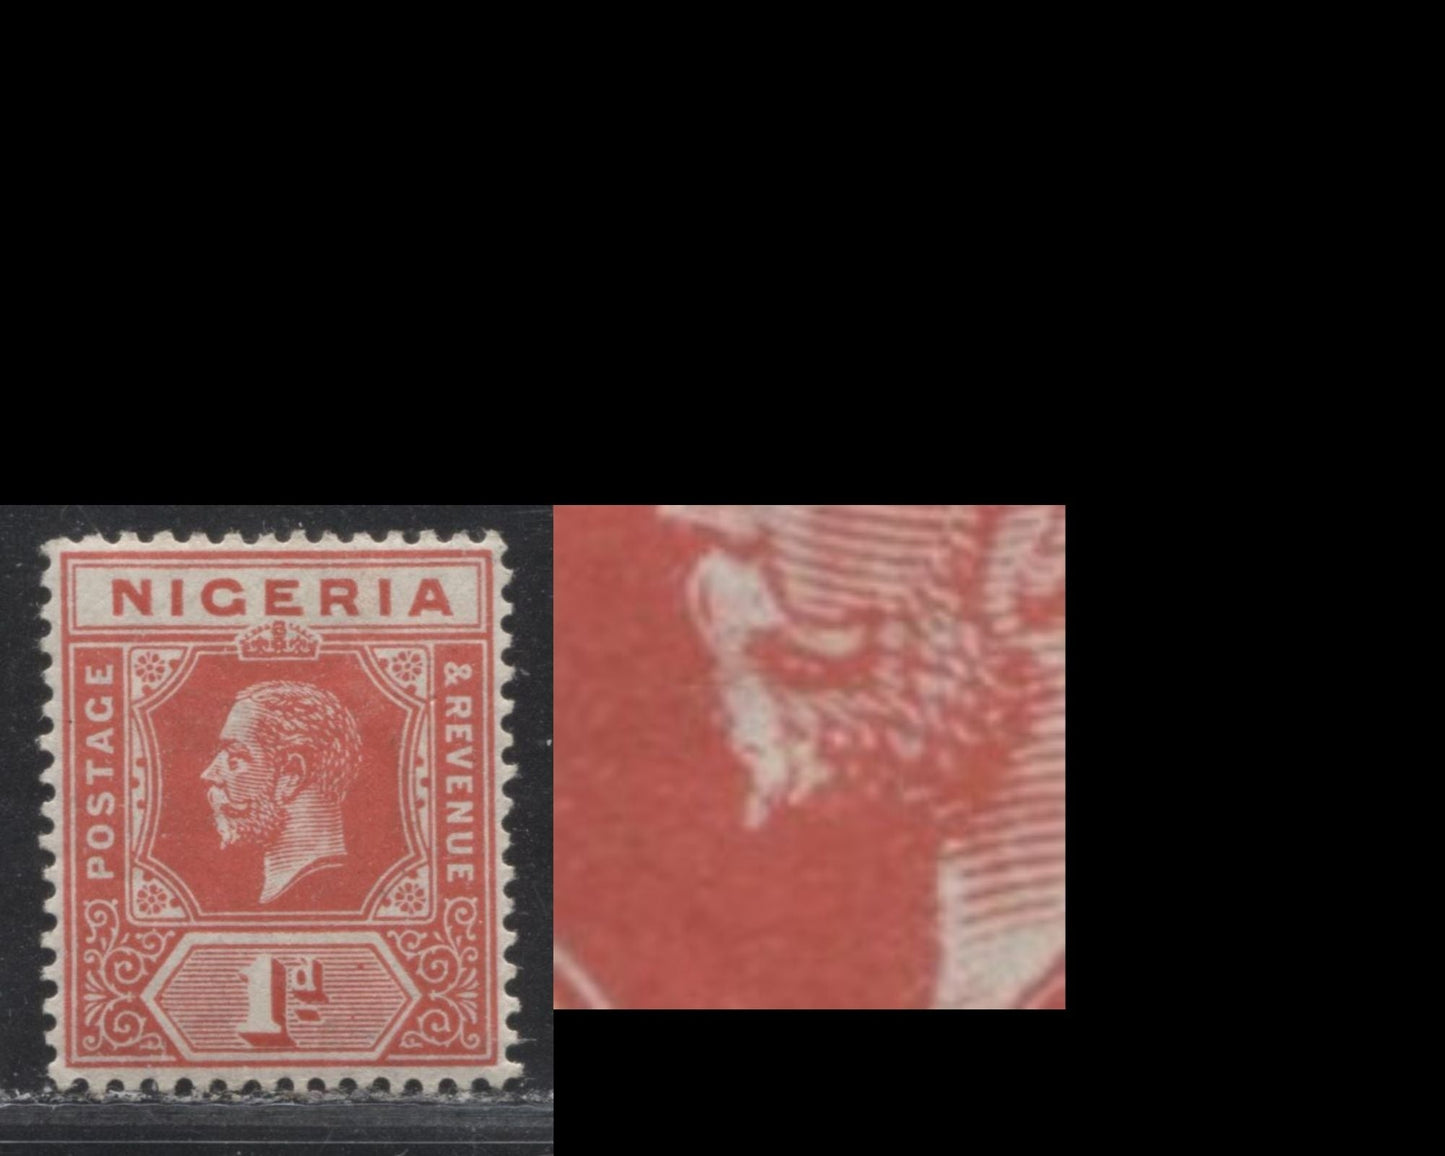 Lot 174 Nigeria SG# 2avar 1d Scarlet King George V, 1914-1921 Multiple Crown CA Imperium Keyplate Issue, A VFLH Example, With Unlisted "White Beard" Flaw